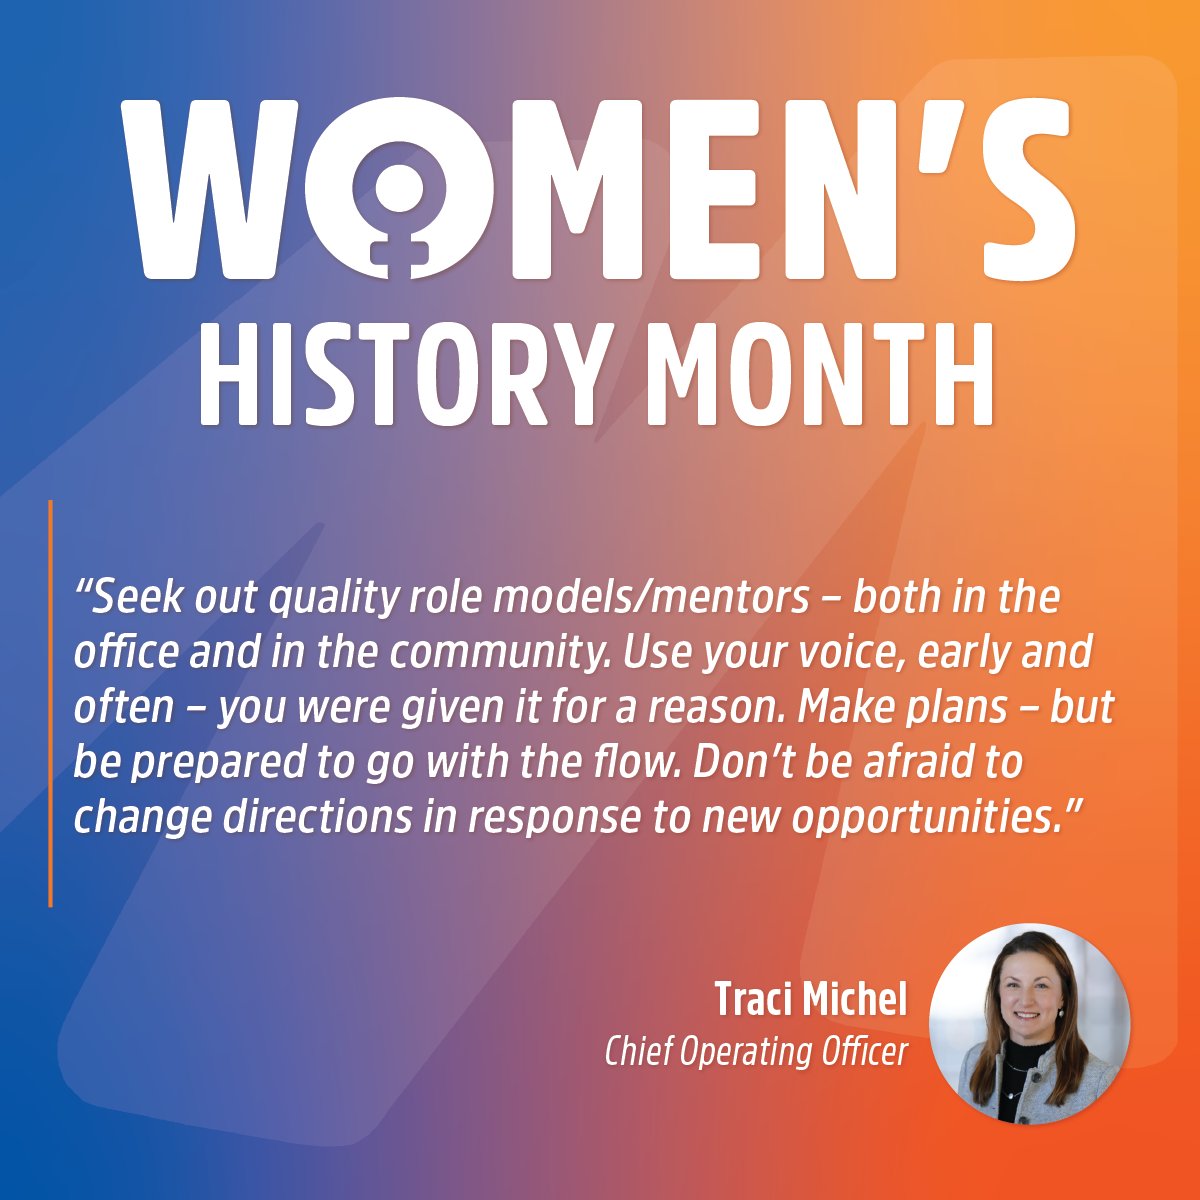 We’re celebrating our female-identifying colleagues in honor of #WomensHistoryMonth by sharing their words of advice each week this month. 
#internationalwomensday #womeninbusiness #womenexecutives #womenshistorymonth #creditunions #creditunion #advice #wordsofwisdom